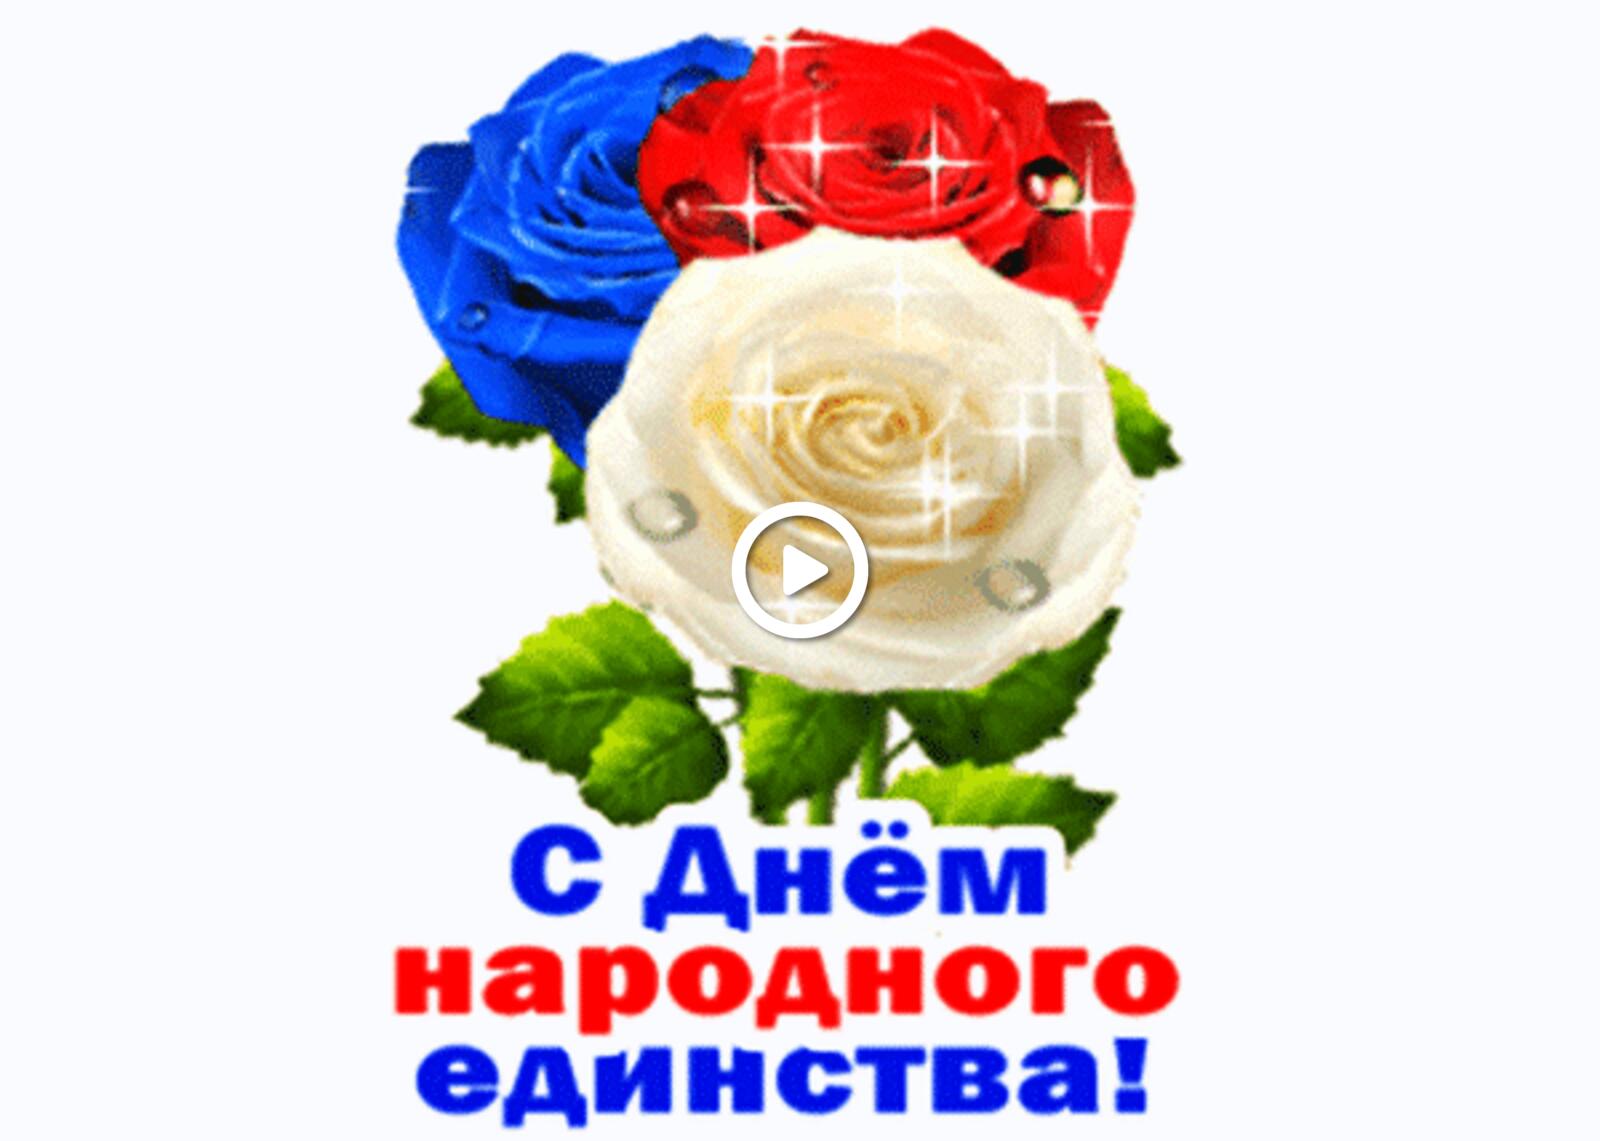 A postcard on the subject of flowers roses happy national unity day for free